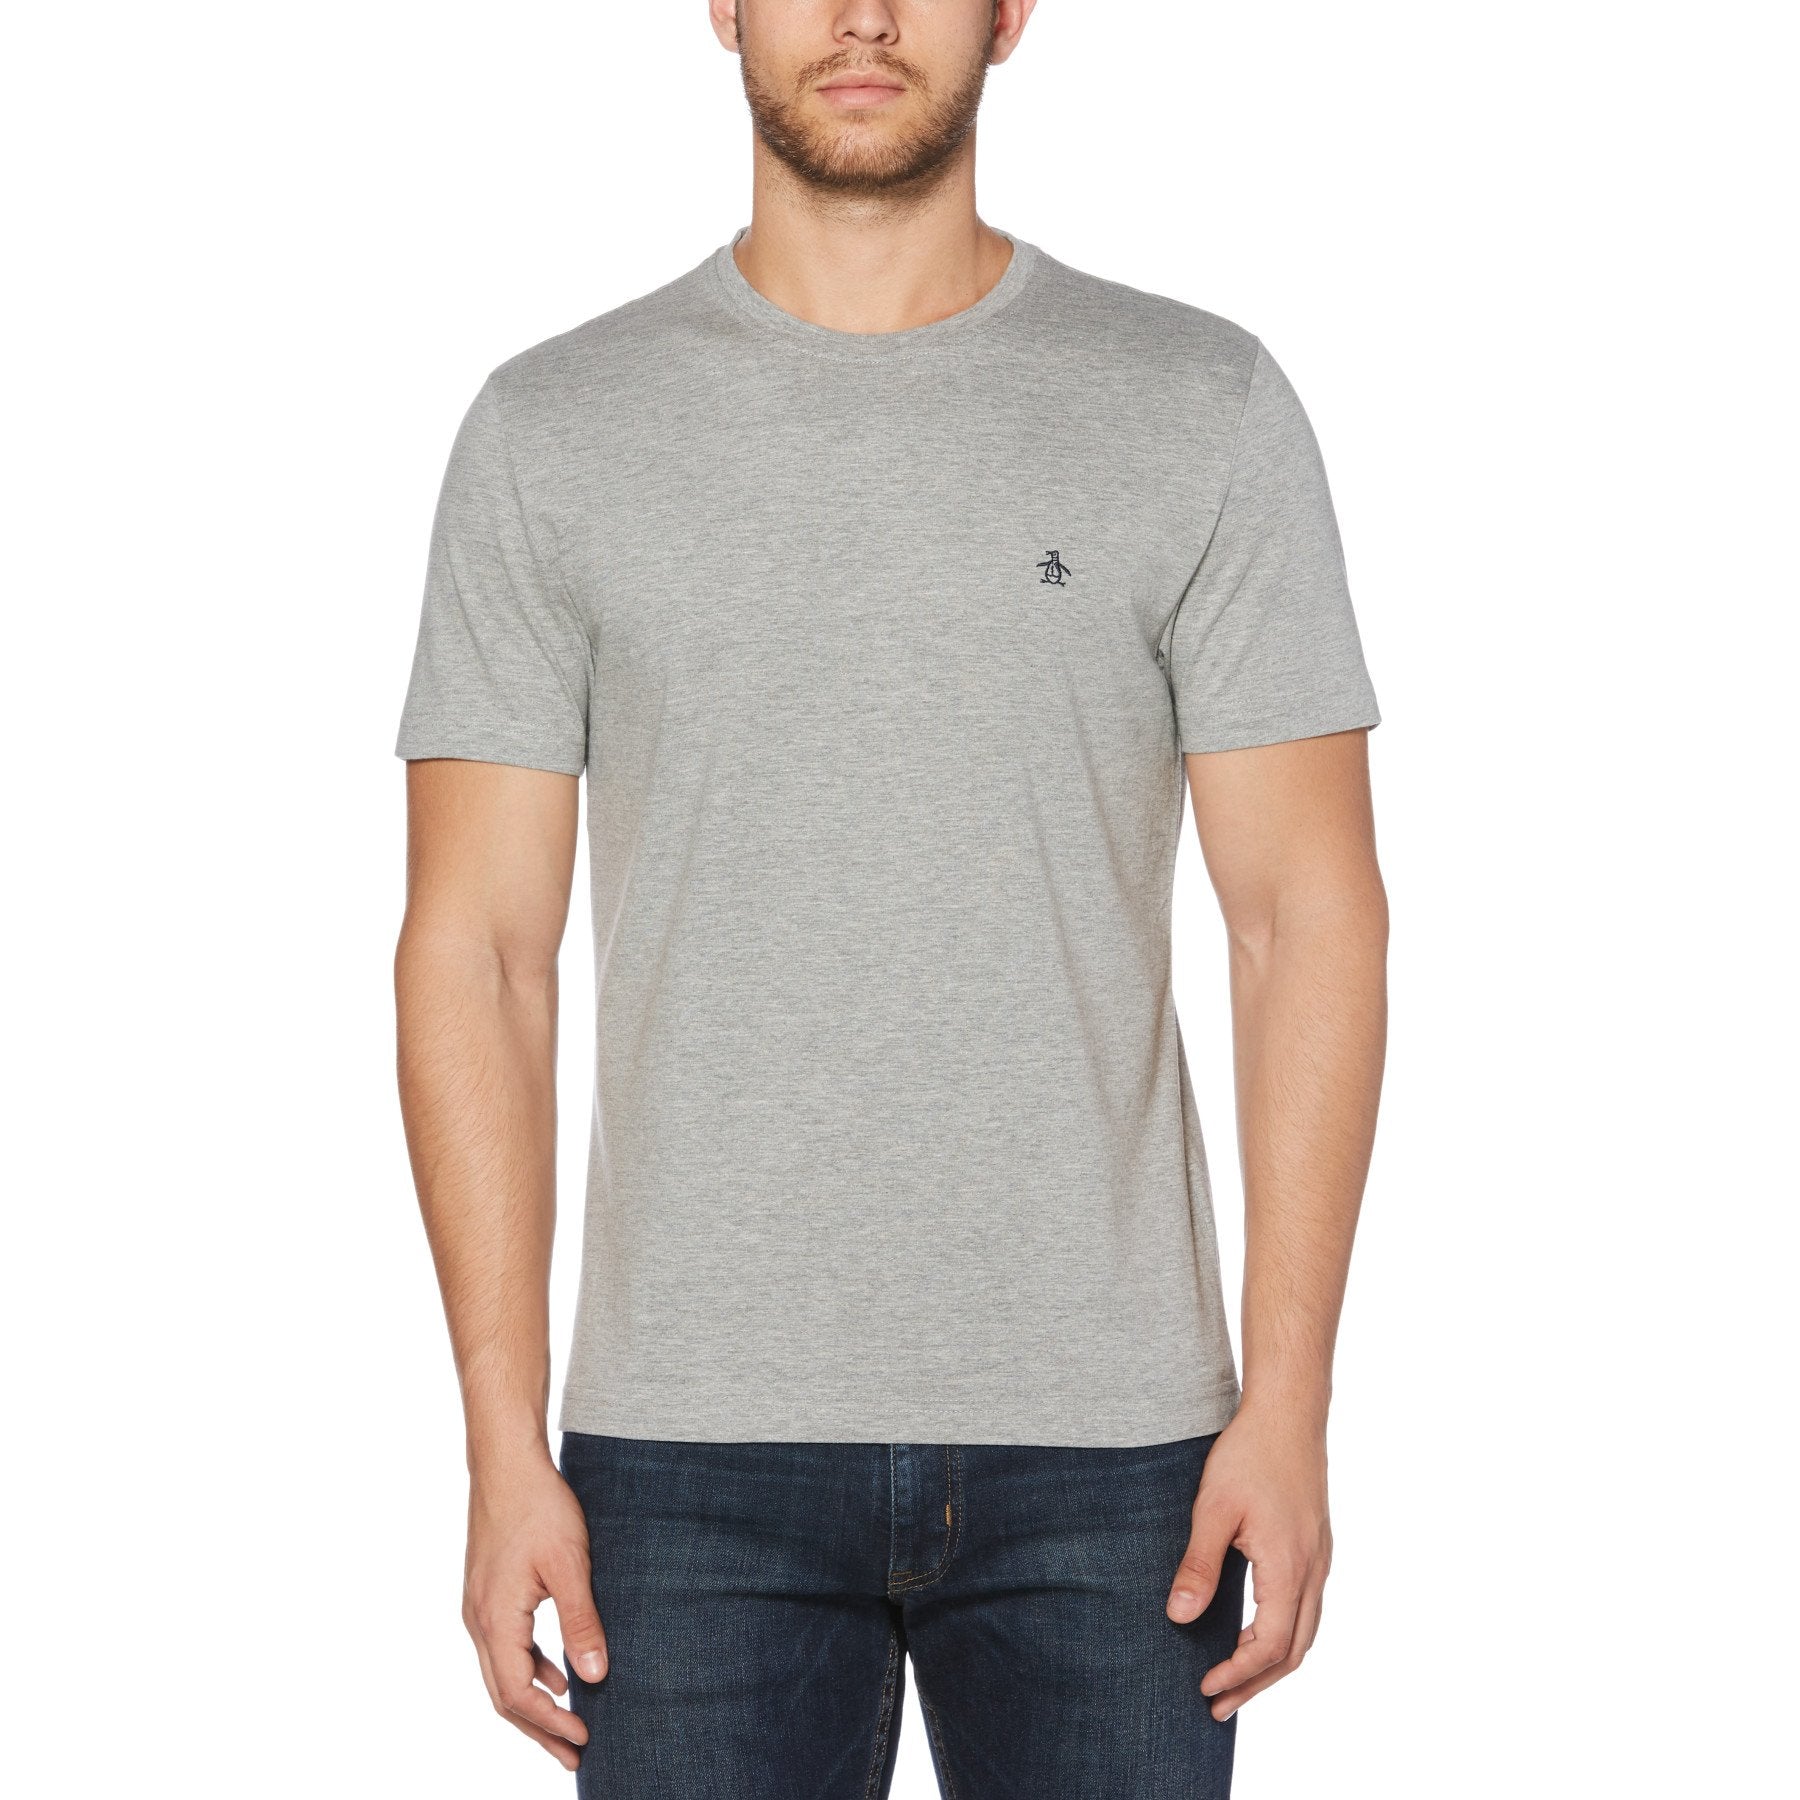 View Pin Point Embroidered Logo Organic Cotton TShirt In Rain Heather information